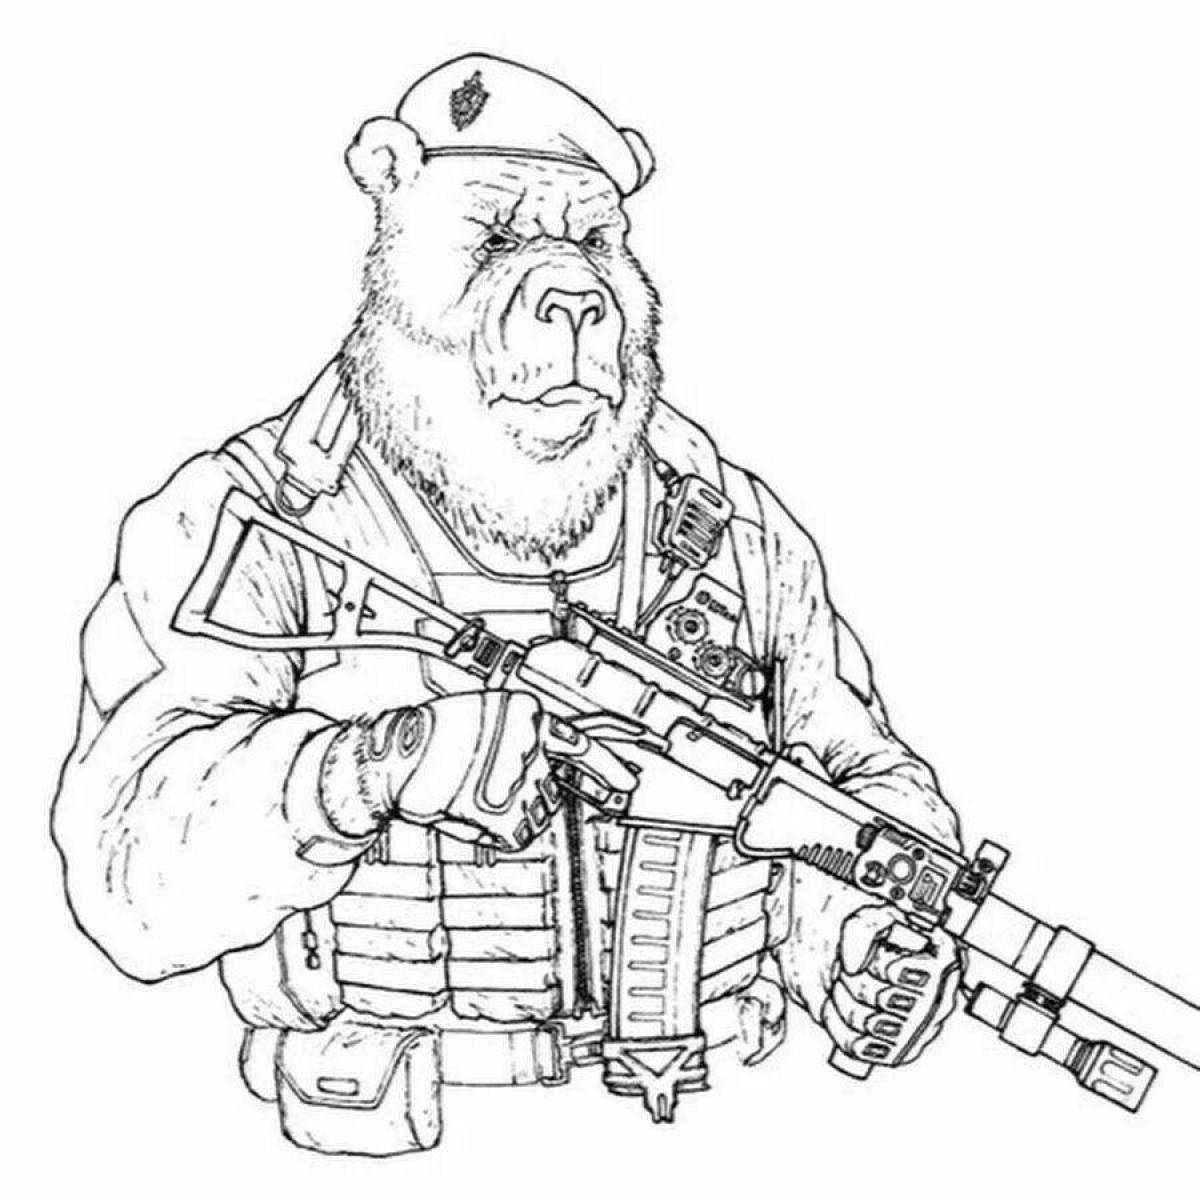 Invulnerable Soldier with Machine Gun coloring page